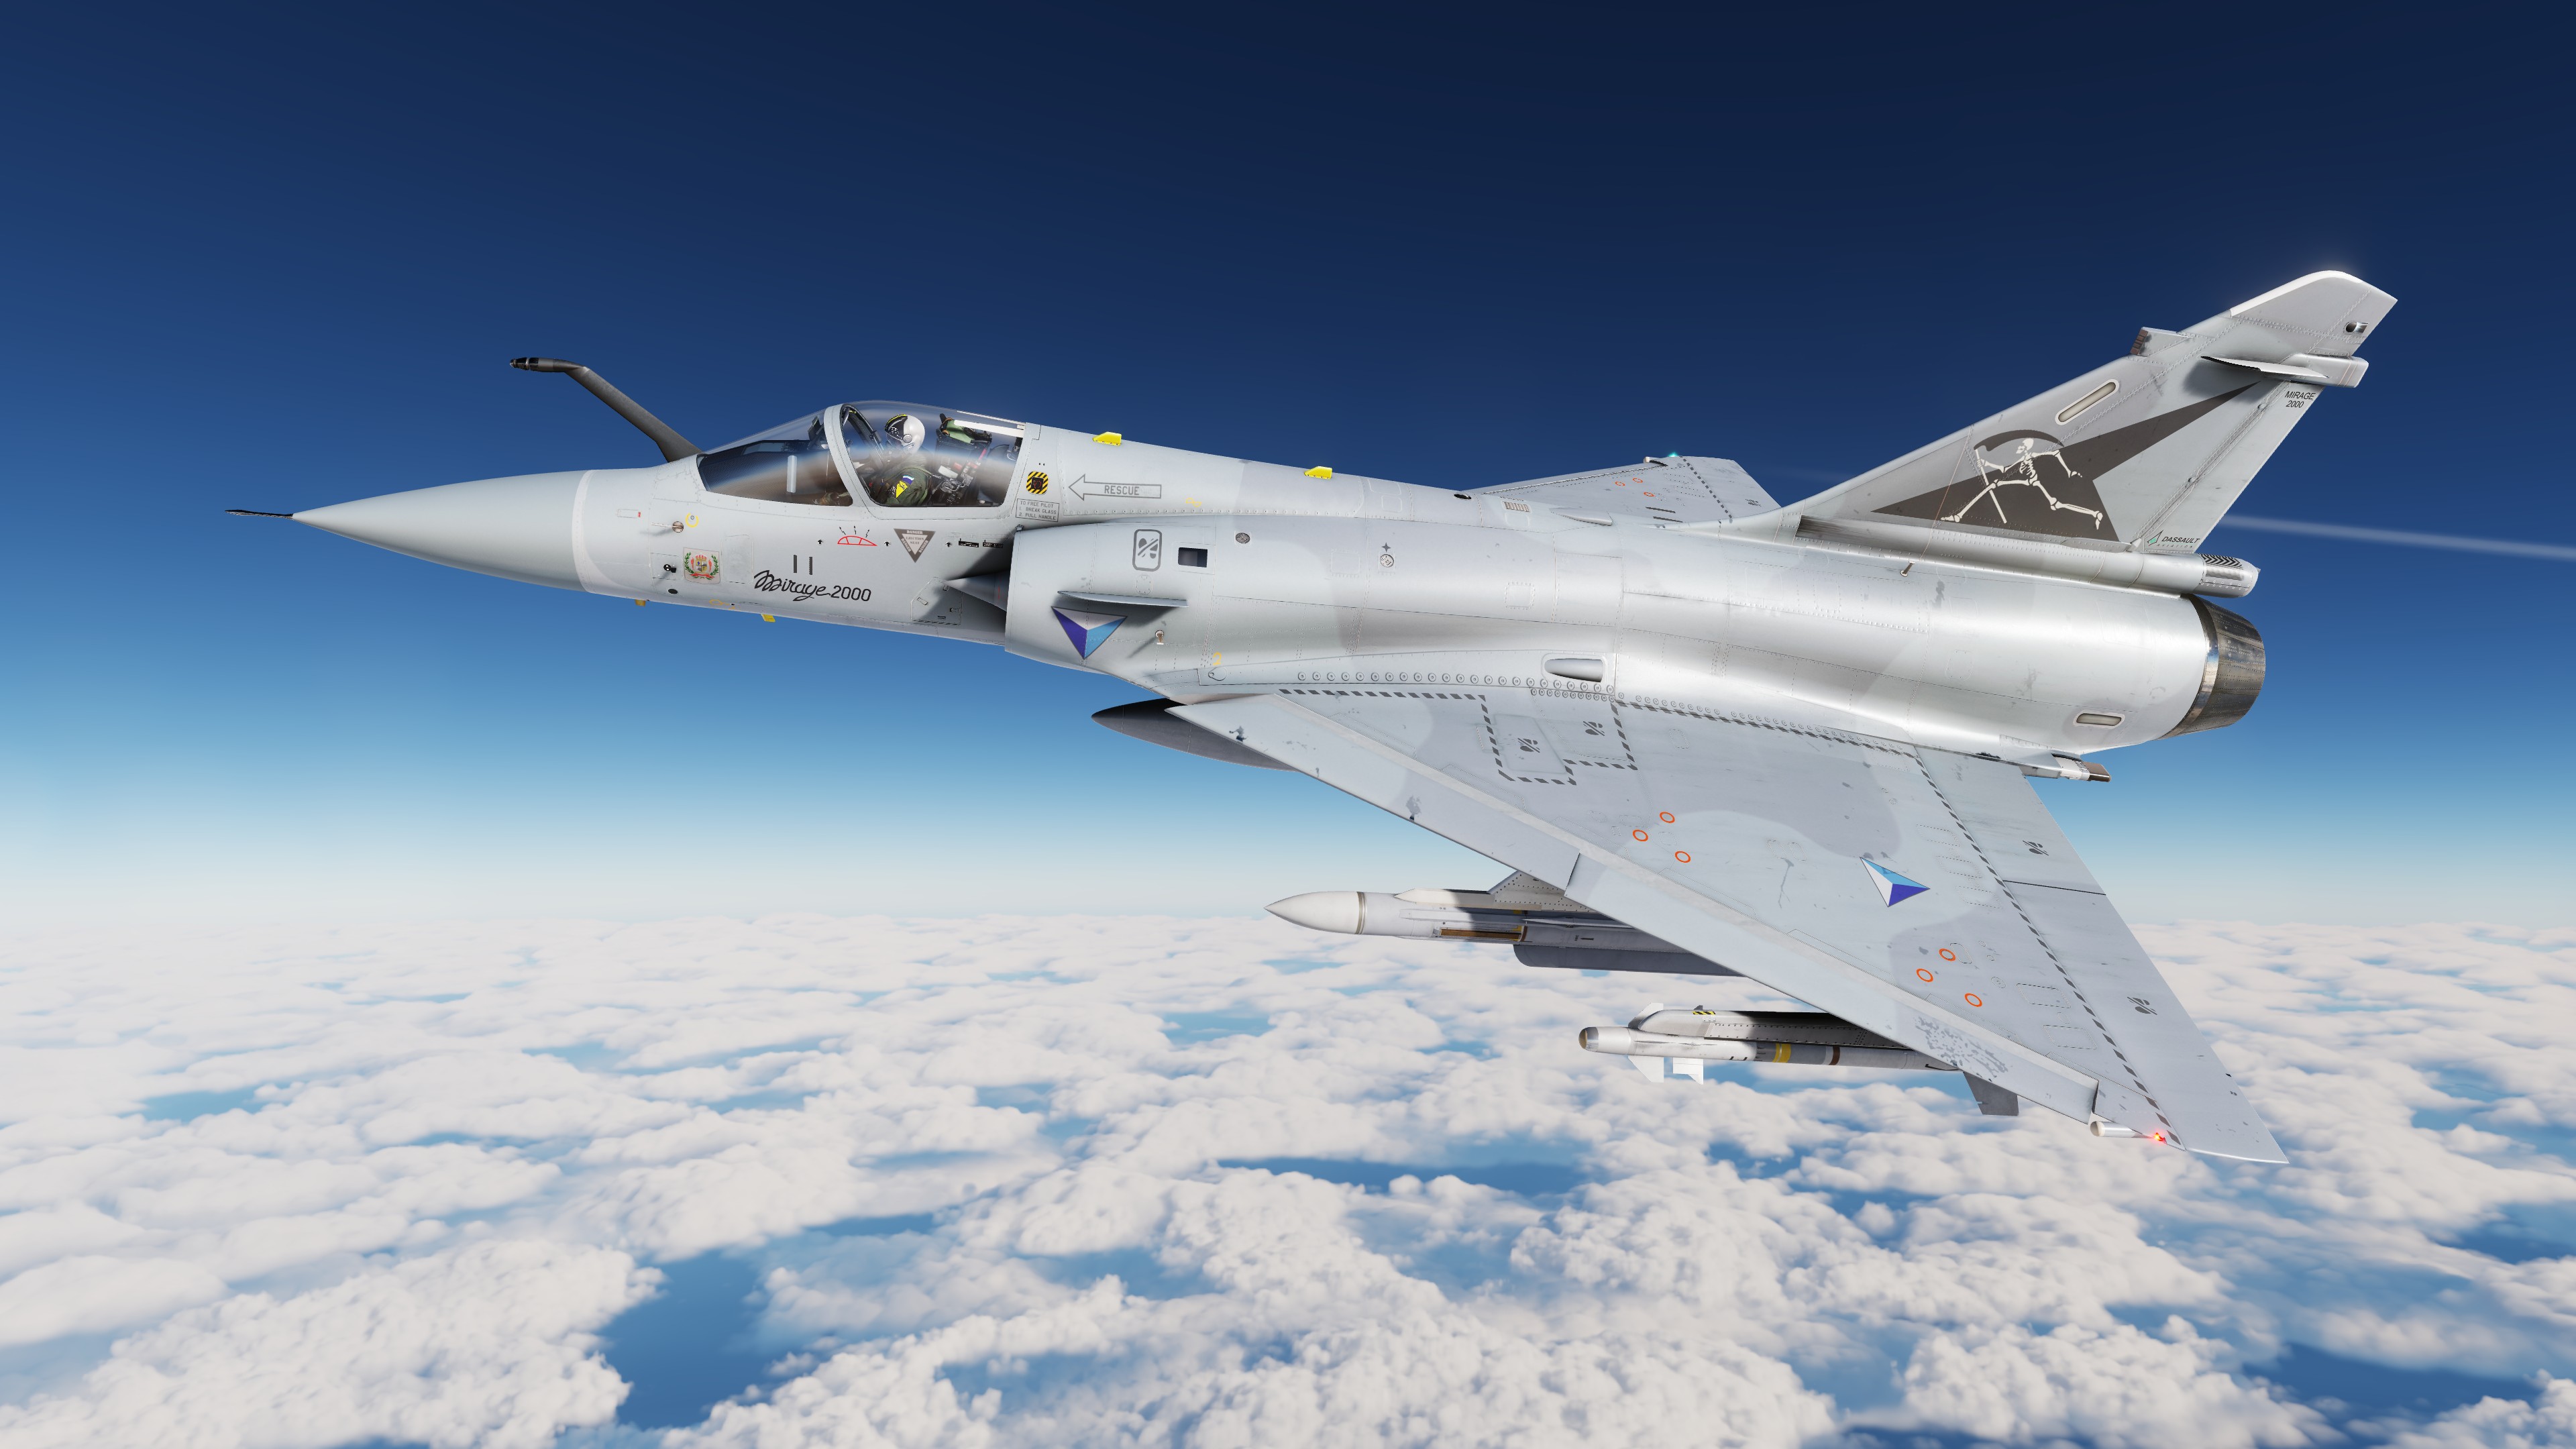 ACE COMBAT - M2000C - Nordennavic Royal Air Force - Sqn "Cote d'Or" V1.1